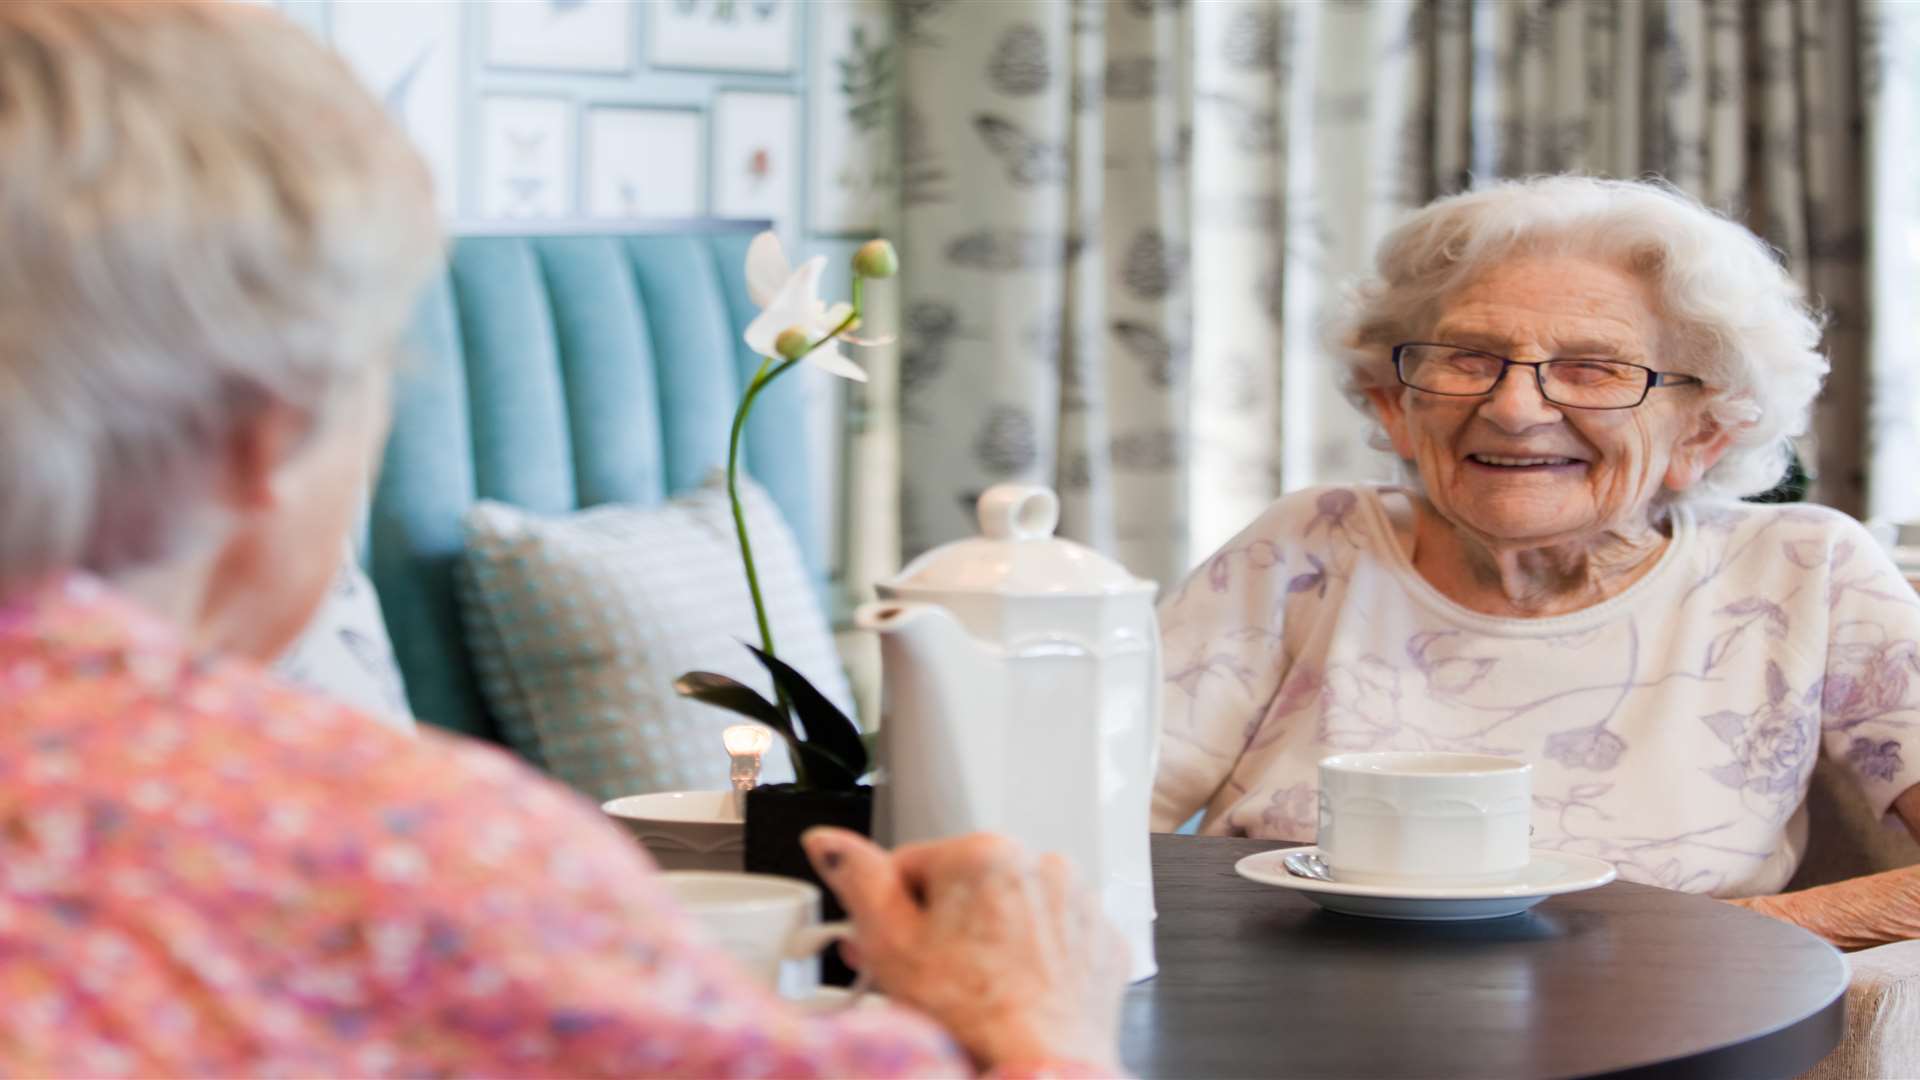 More than a quarter of million over 65 year olds were living in care homes in 2011